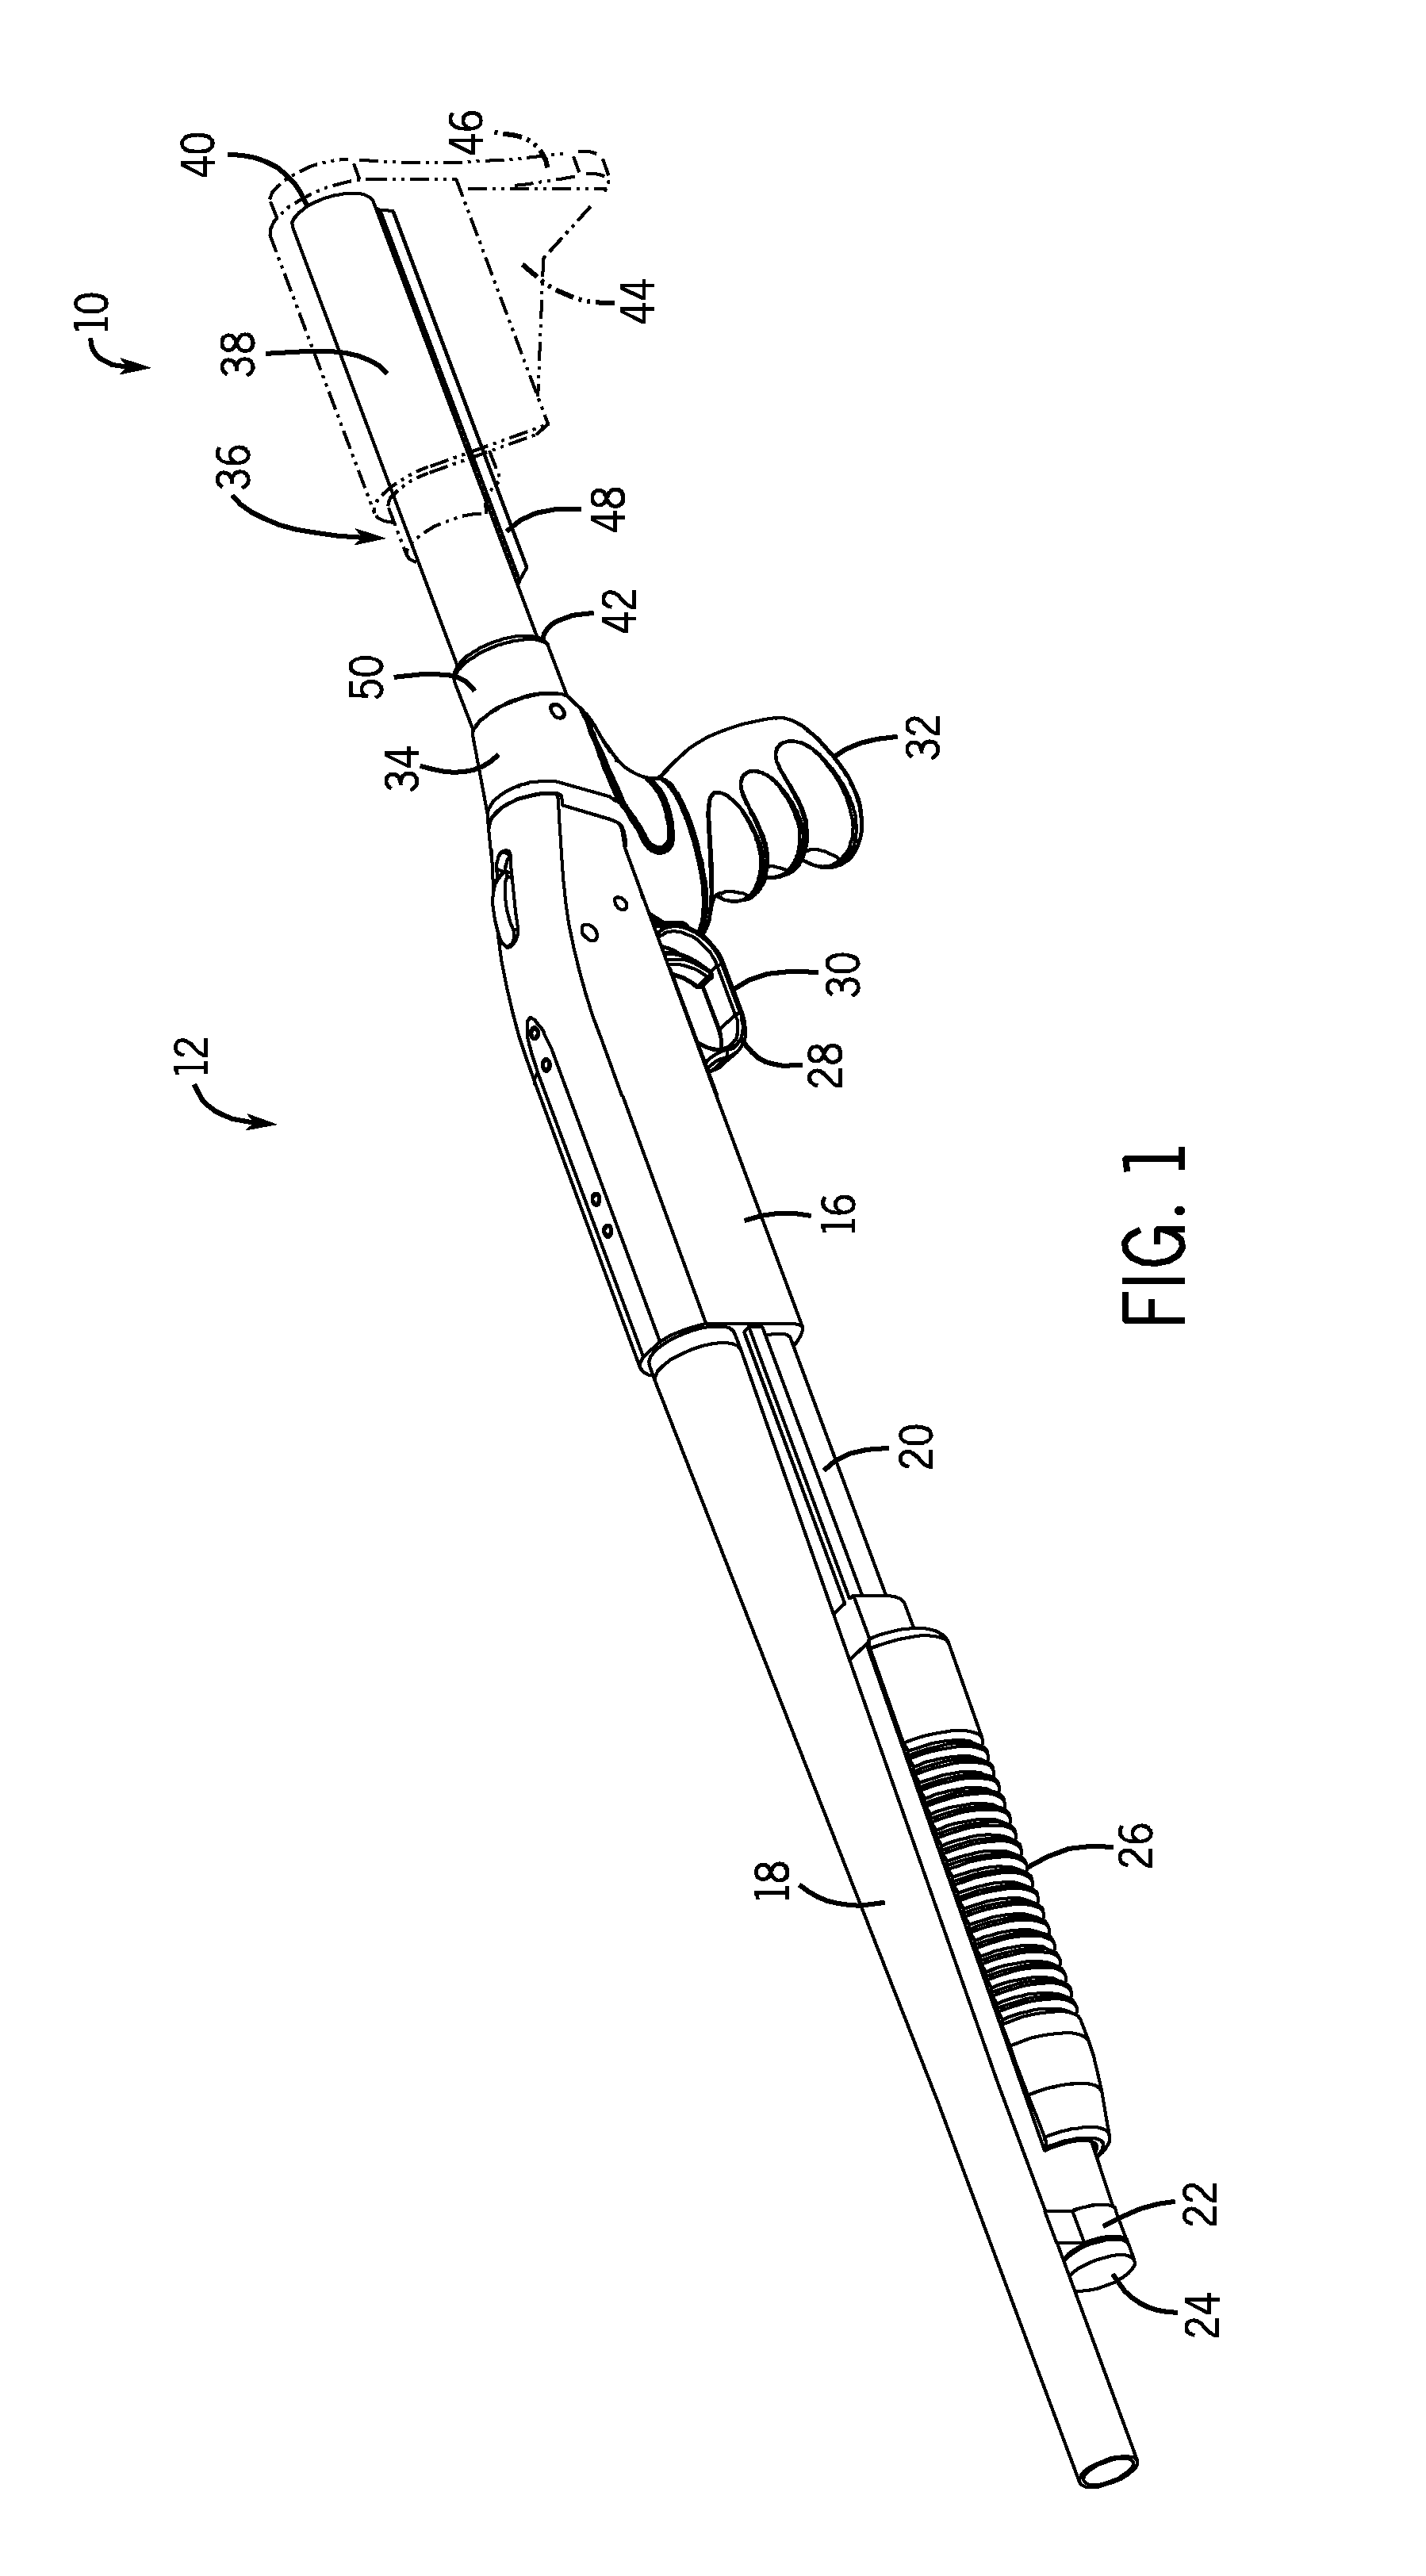 Side folding stock assembly with concealed hinge arrangement